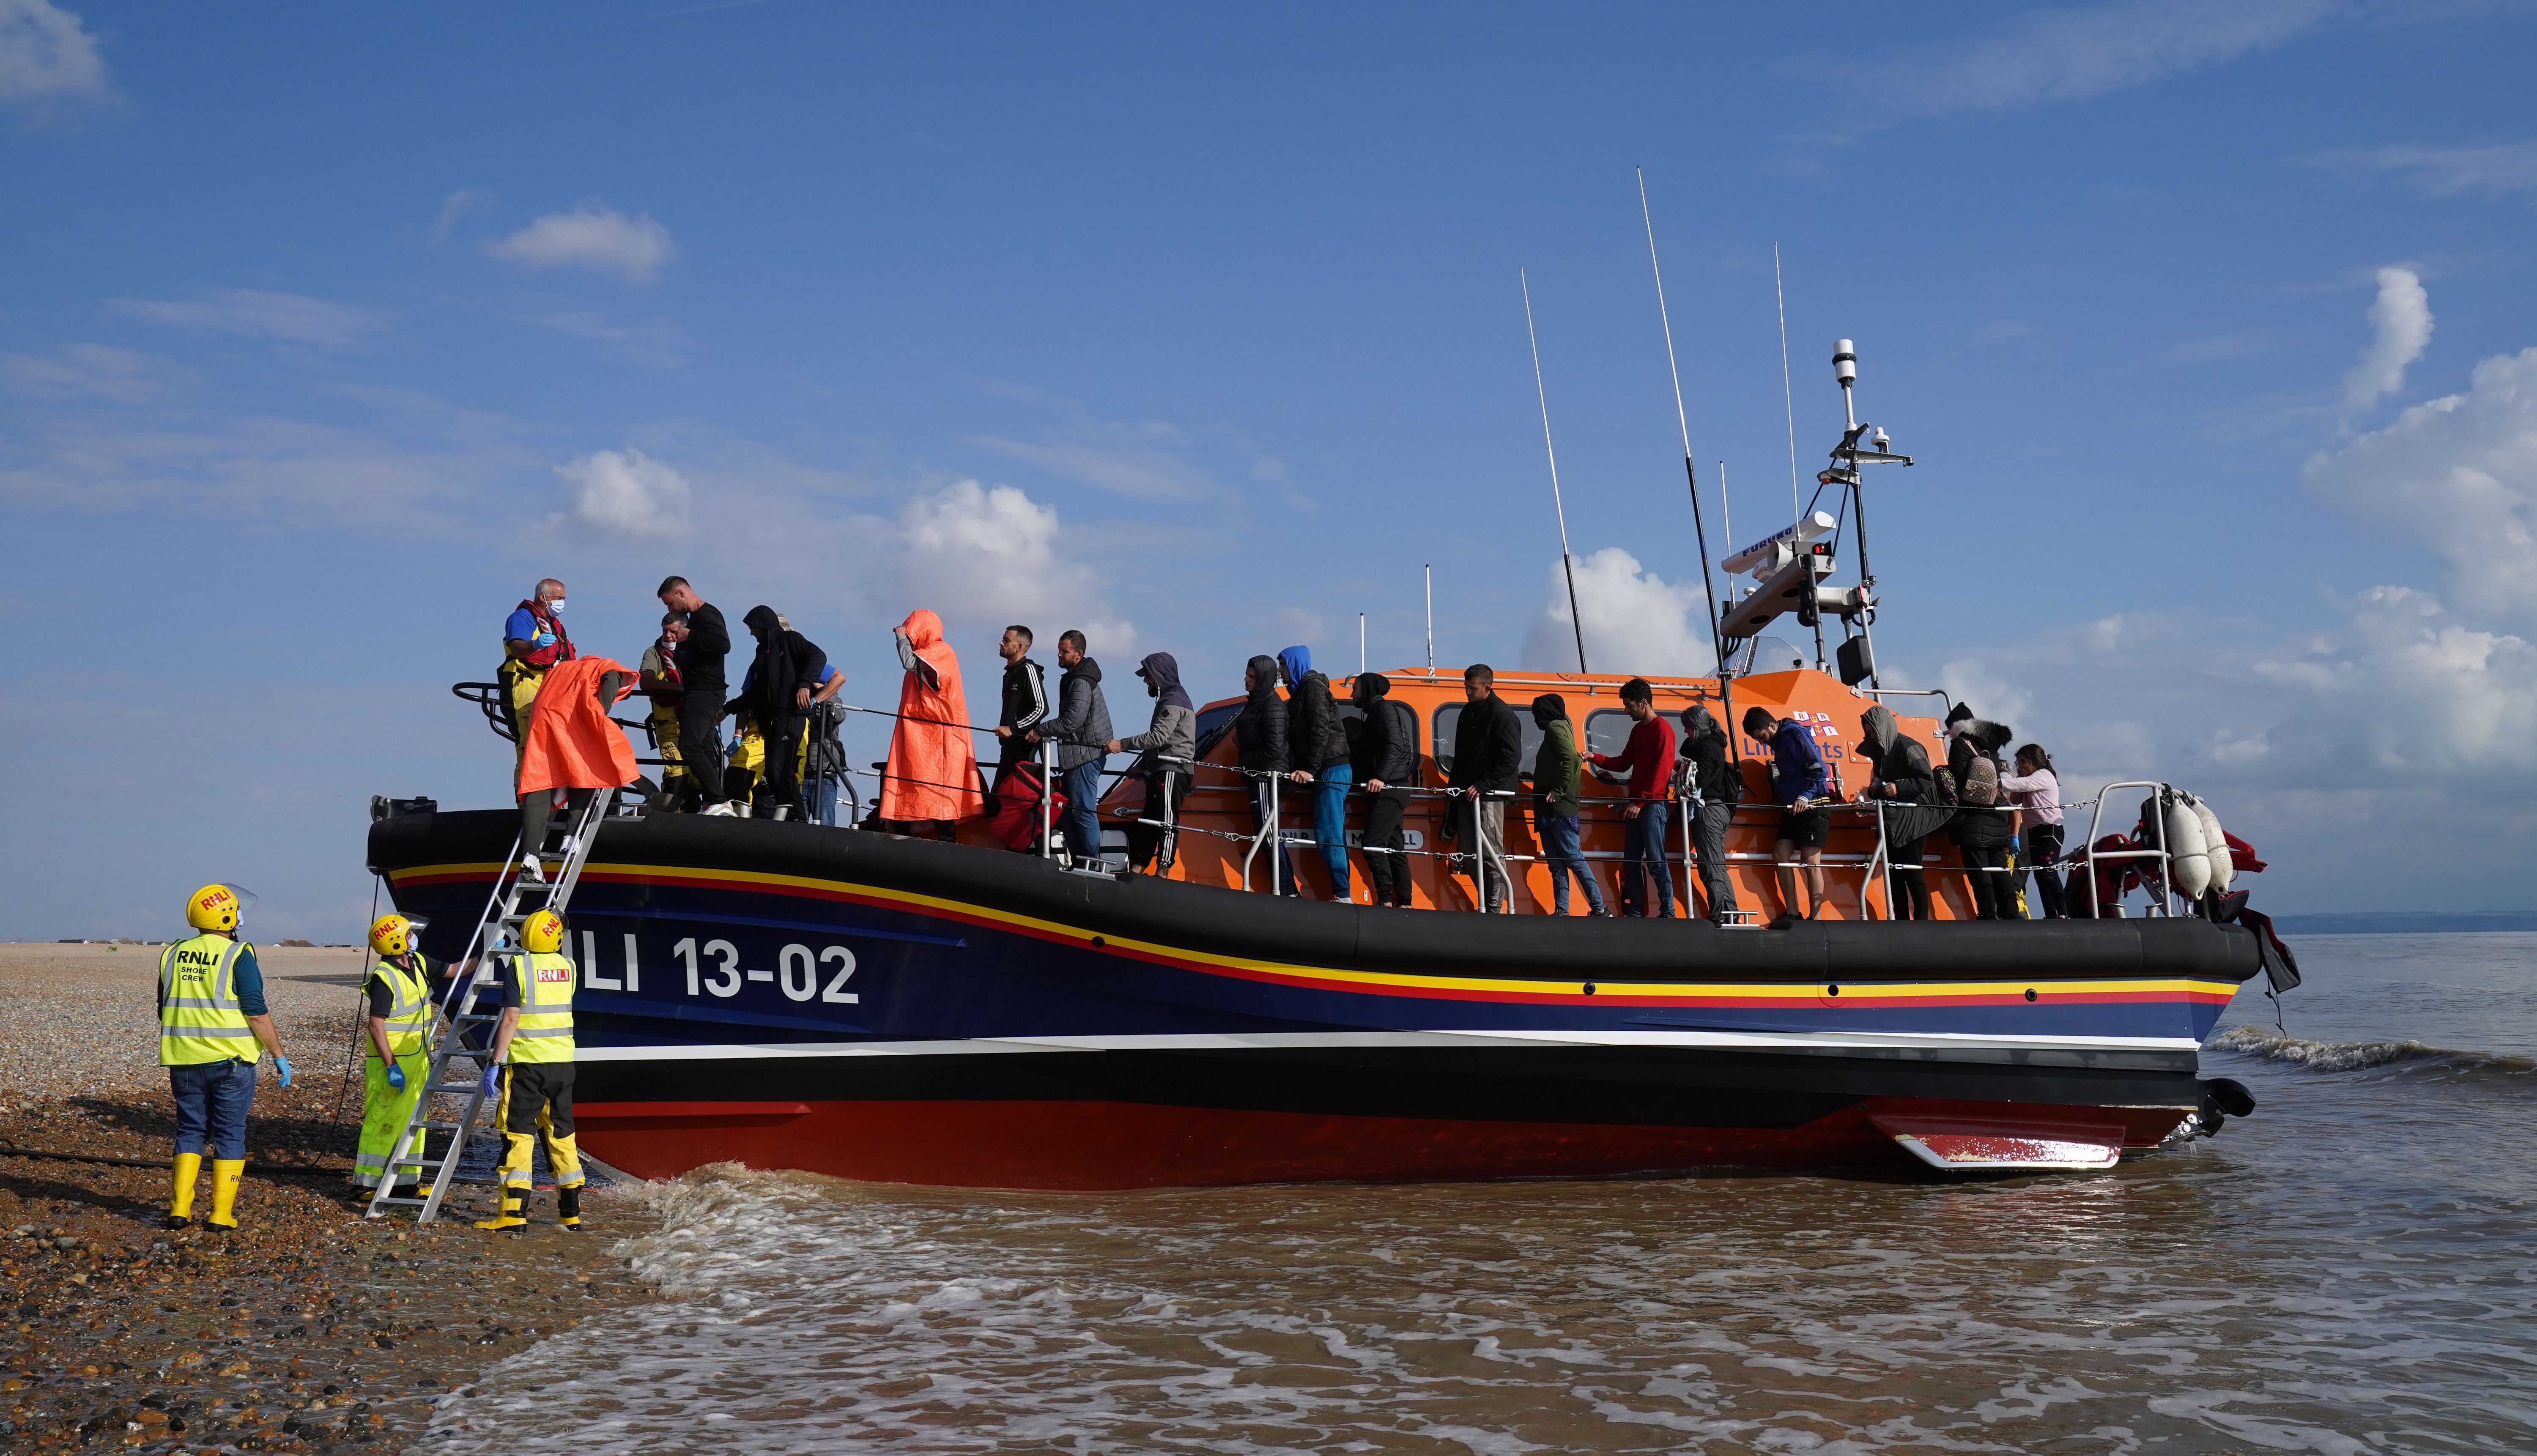 A group of people thought to be migrants are brought in to Dungeness, Kent, onboard an RNLI Lifeboat. Many of those crossing the Channel have found to have come from Albania.